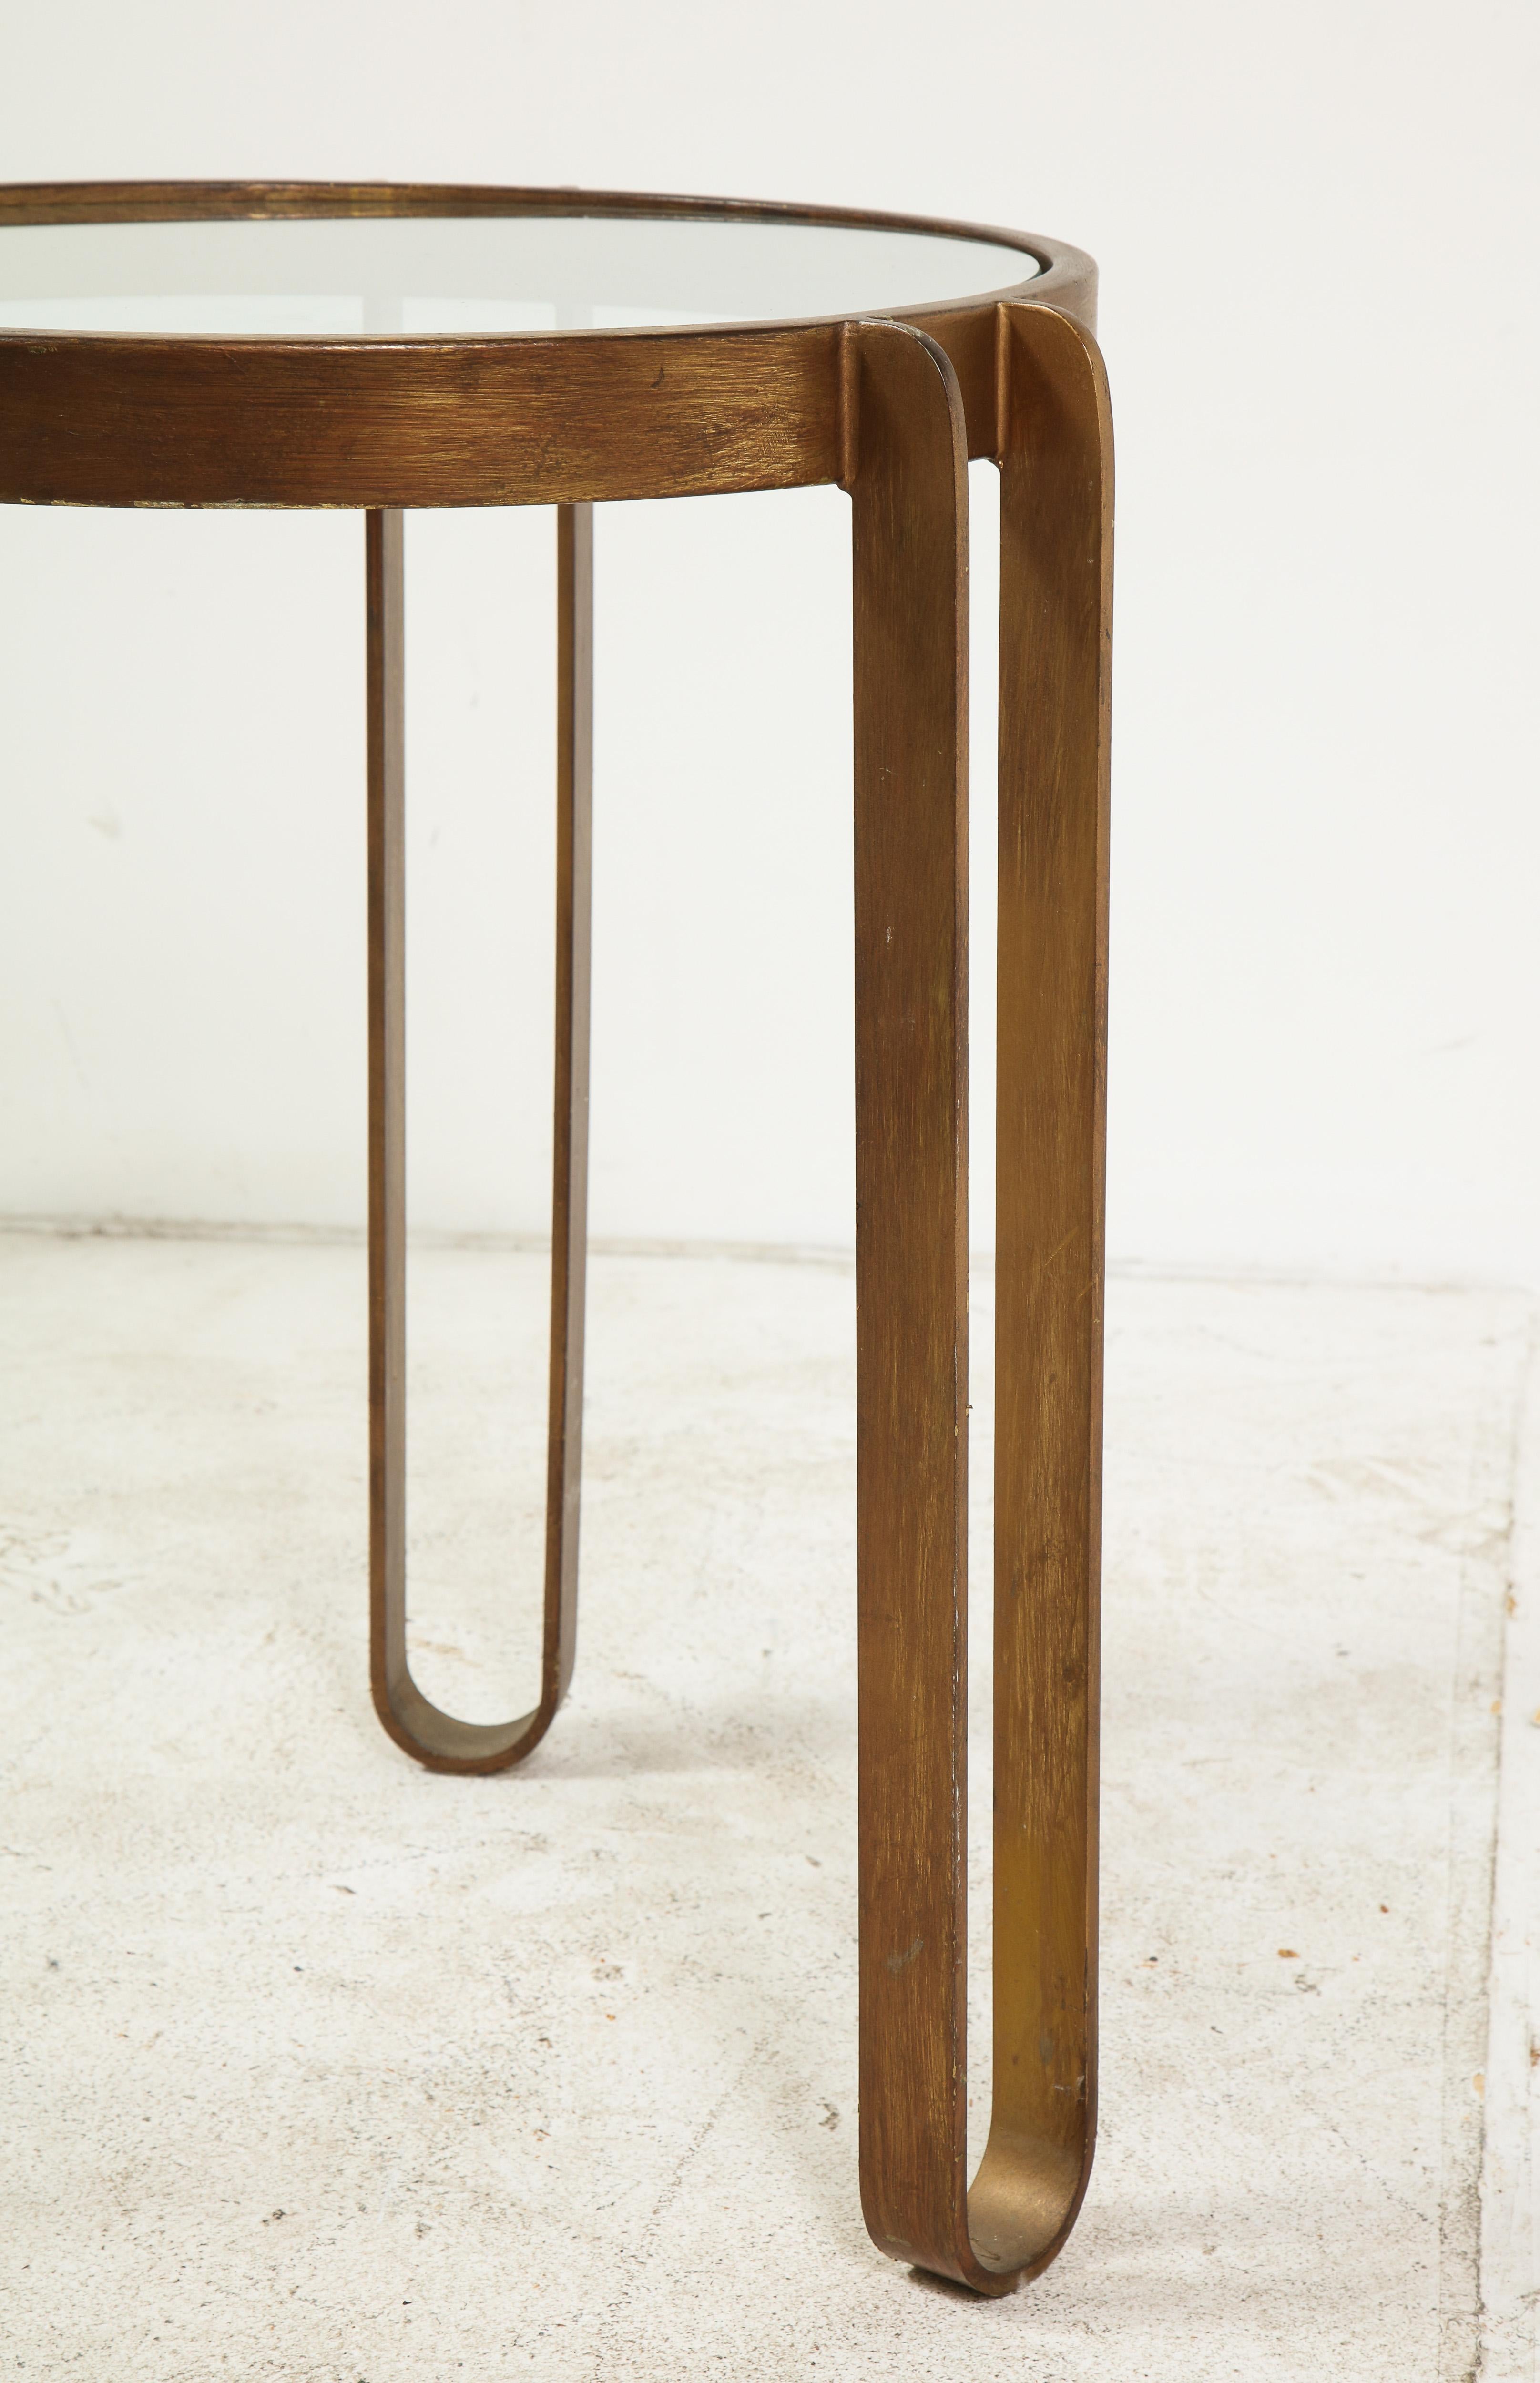 Round brass and glass side table with three hairpin legs, German, 1940s.